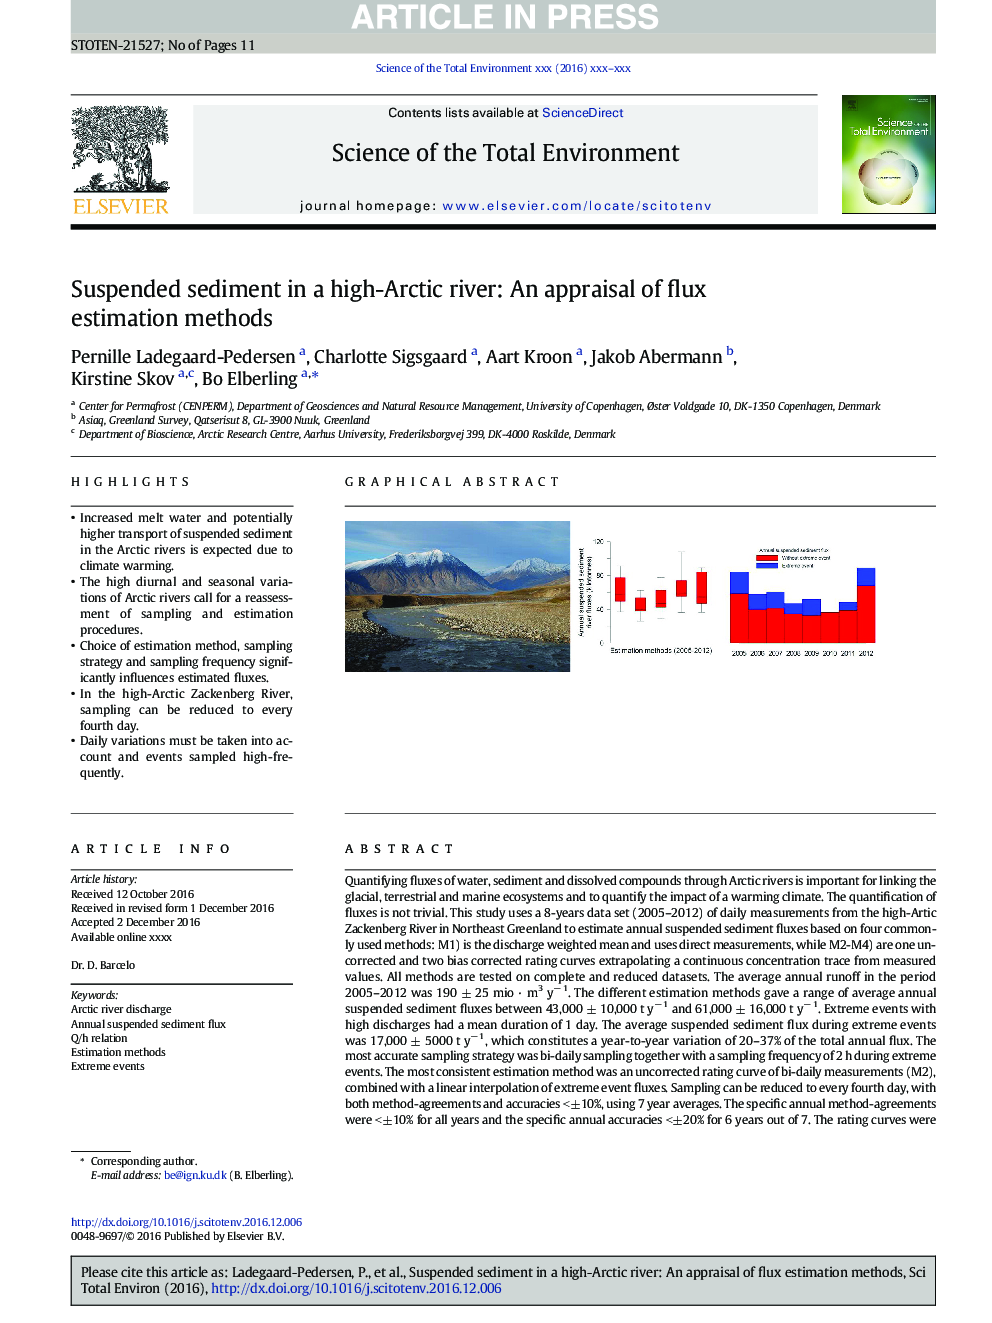 Suspended sediment in a high-Arctic river: An appraisal of flux estimation methods